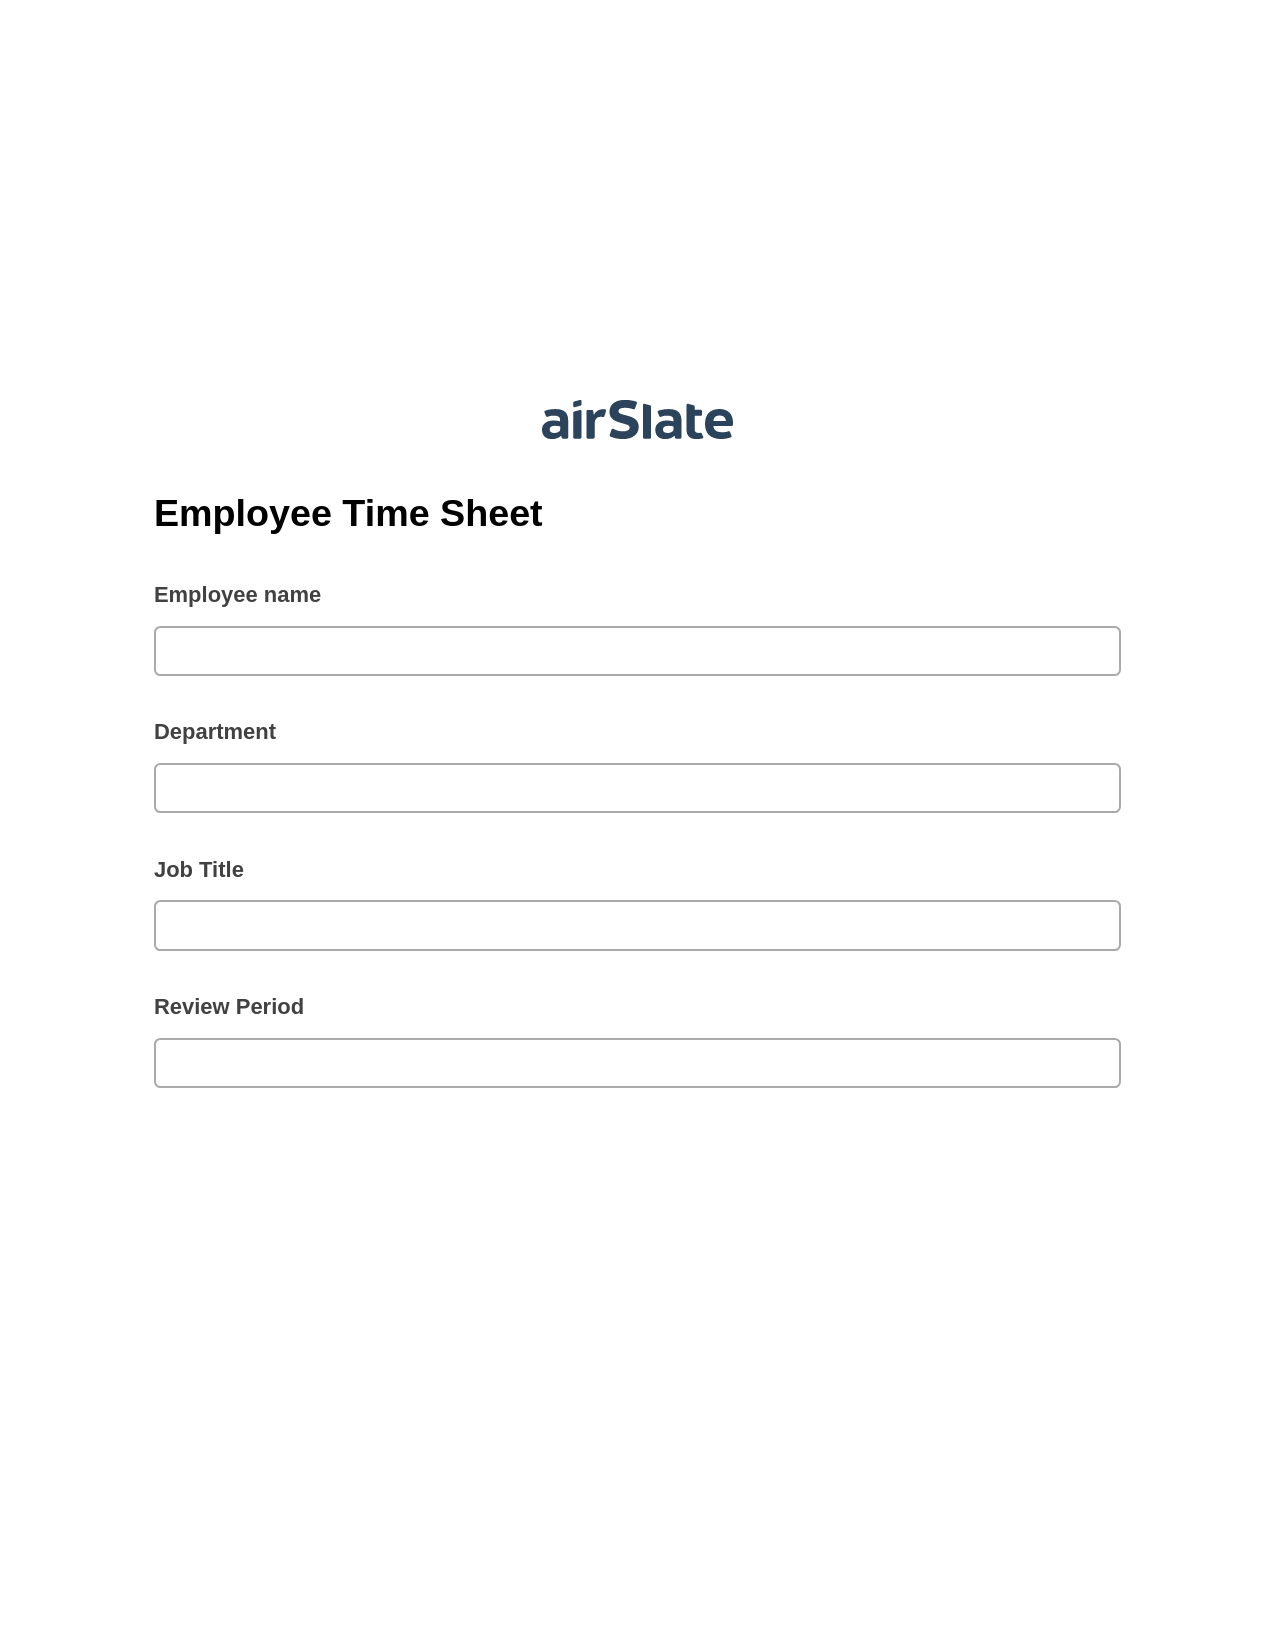 Multirole Employee Time Sheet Pre-fill Document Bot, Update Audit Trail Bot, Export to NetSuite Bot